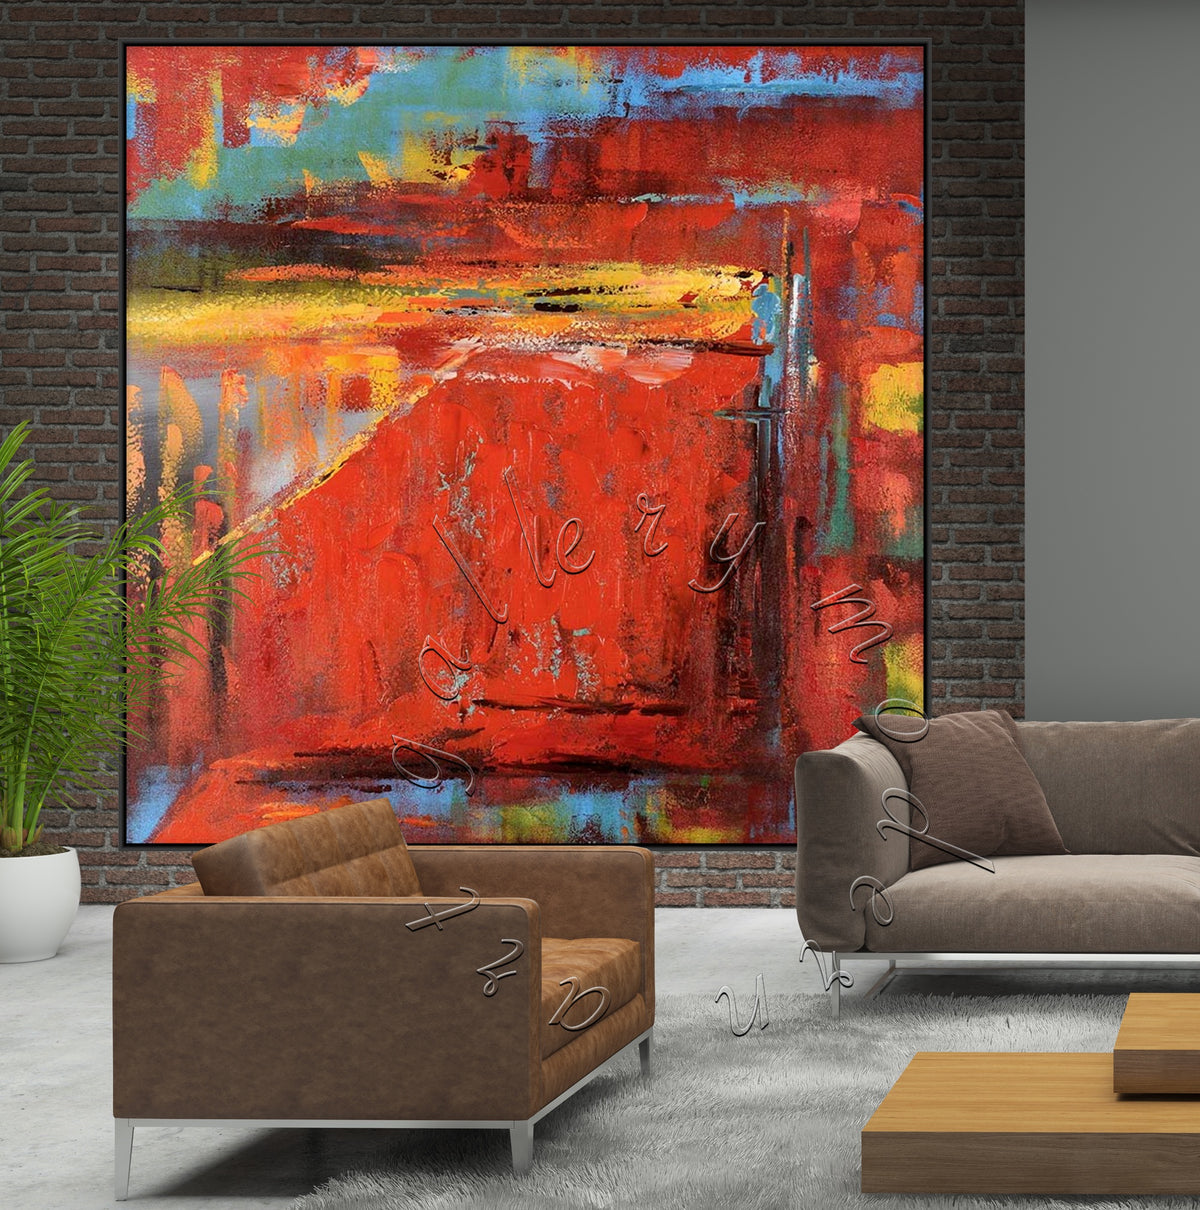 Bright Red Large Abstract Canvas Painting, Original Square Wall Art